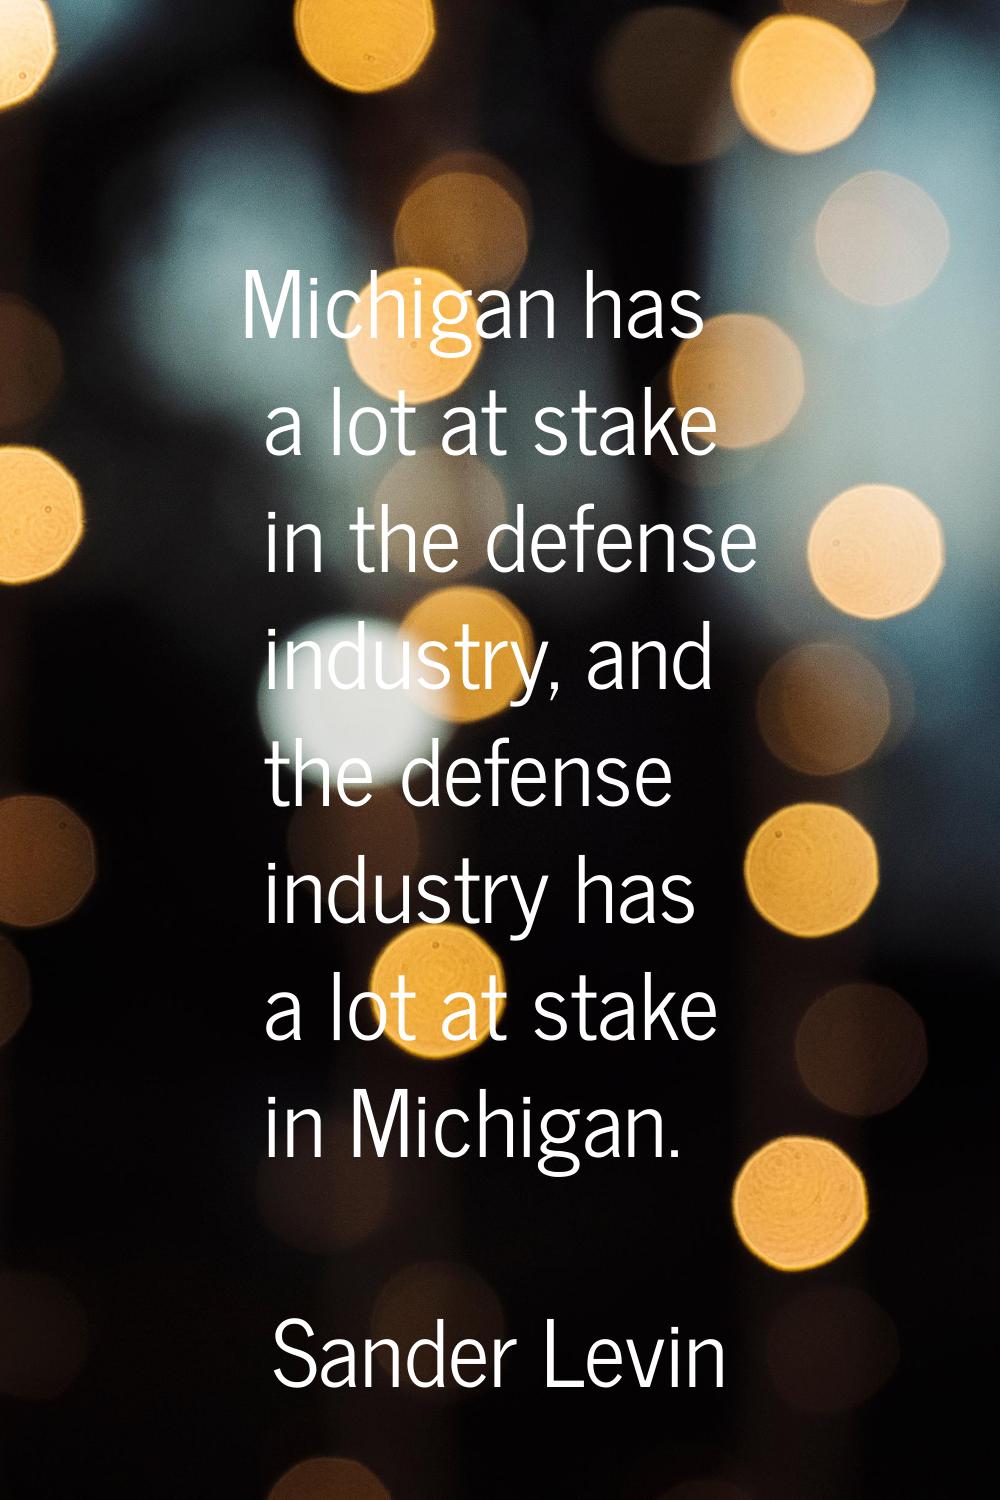 Michigan has a lot at stake in the defense industry, and the defense industry has a lot at stake in